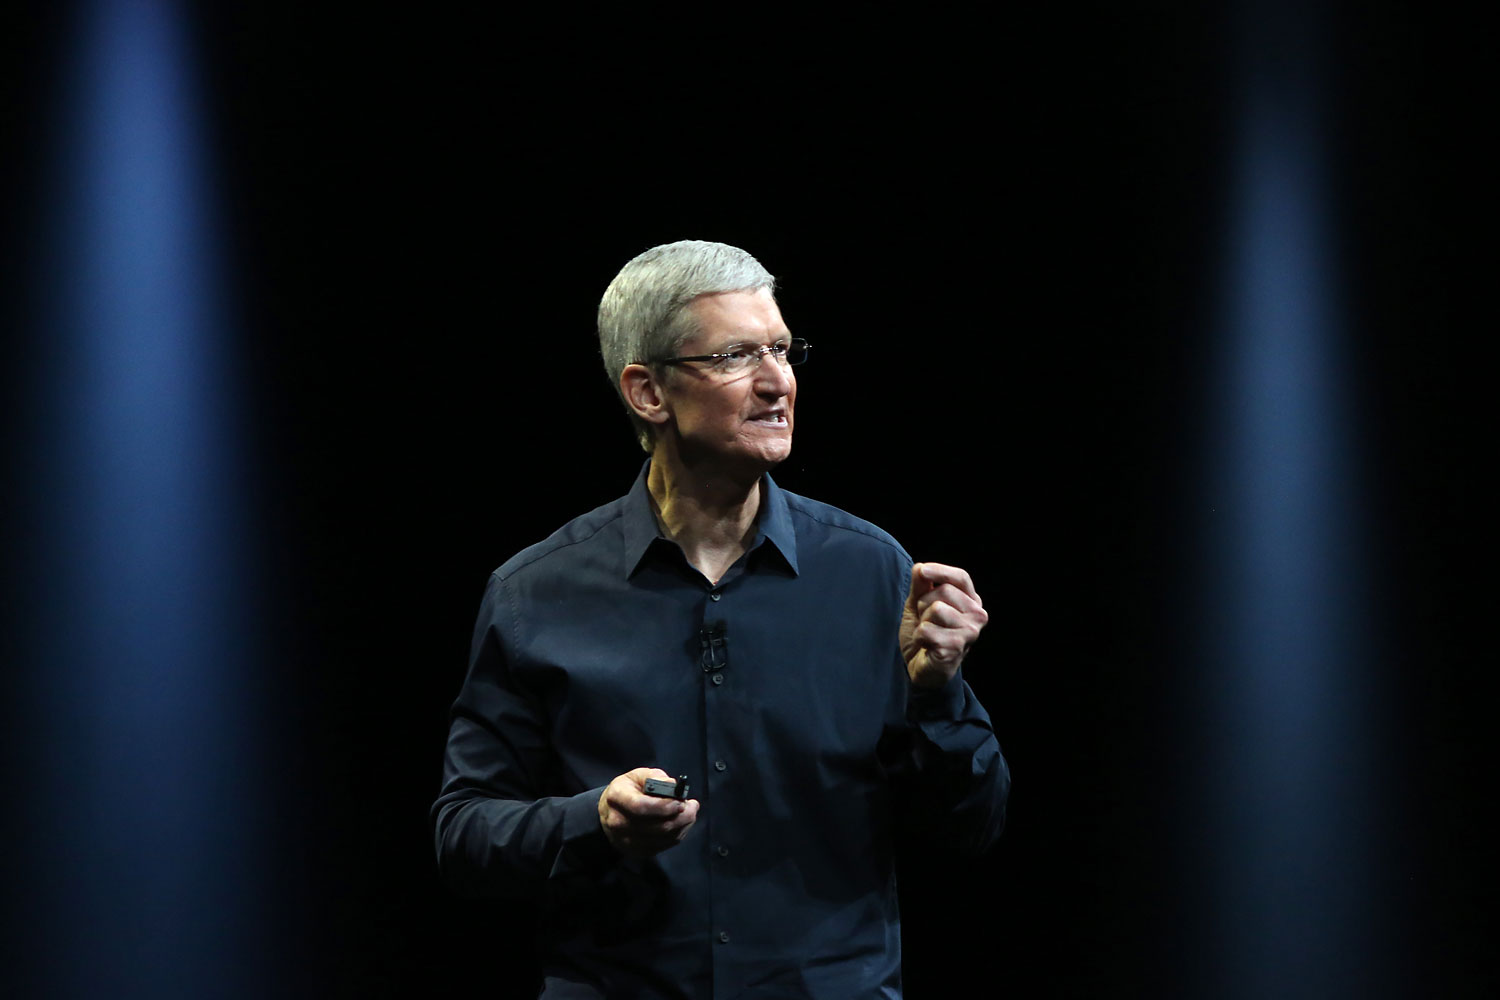 Apple CEO Tim Cook delivers his keynote address at the World Wide developers conference in San Francisco